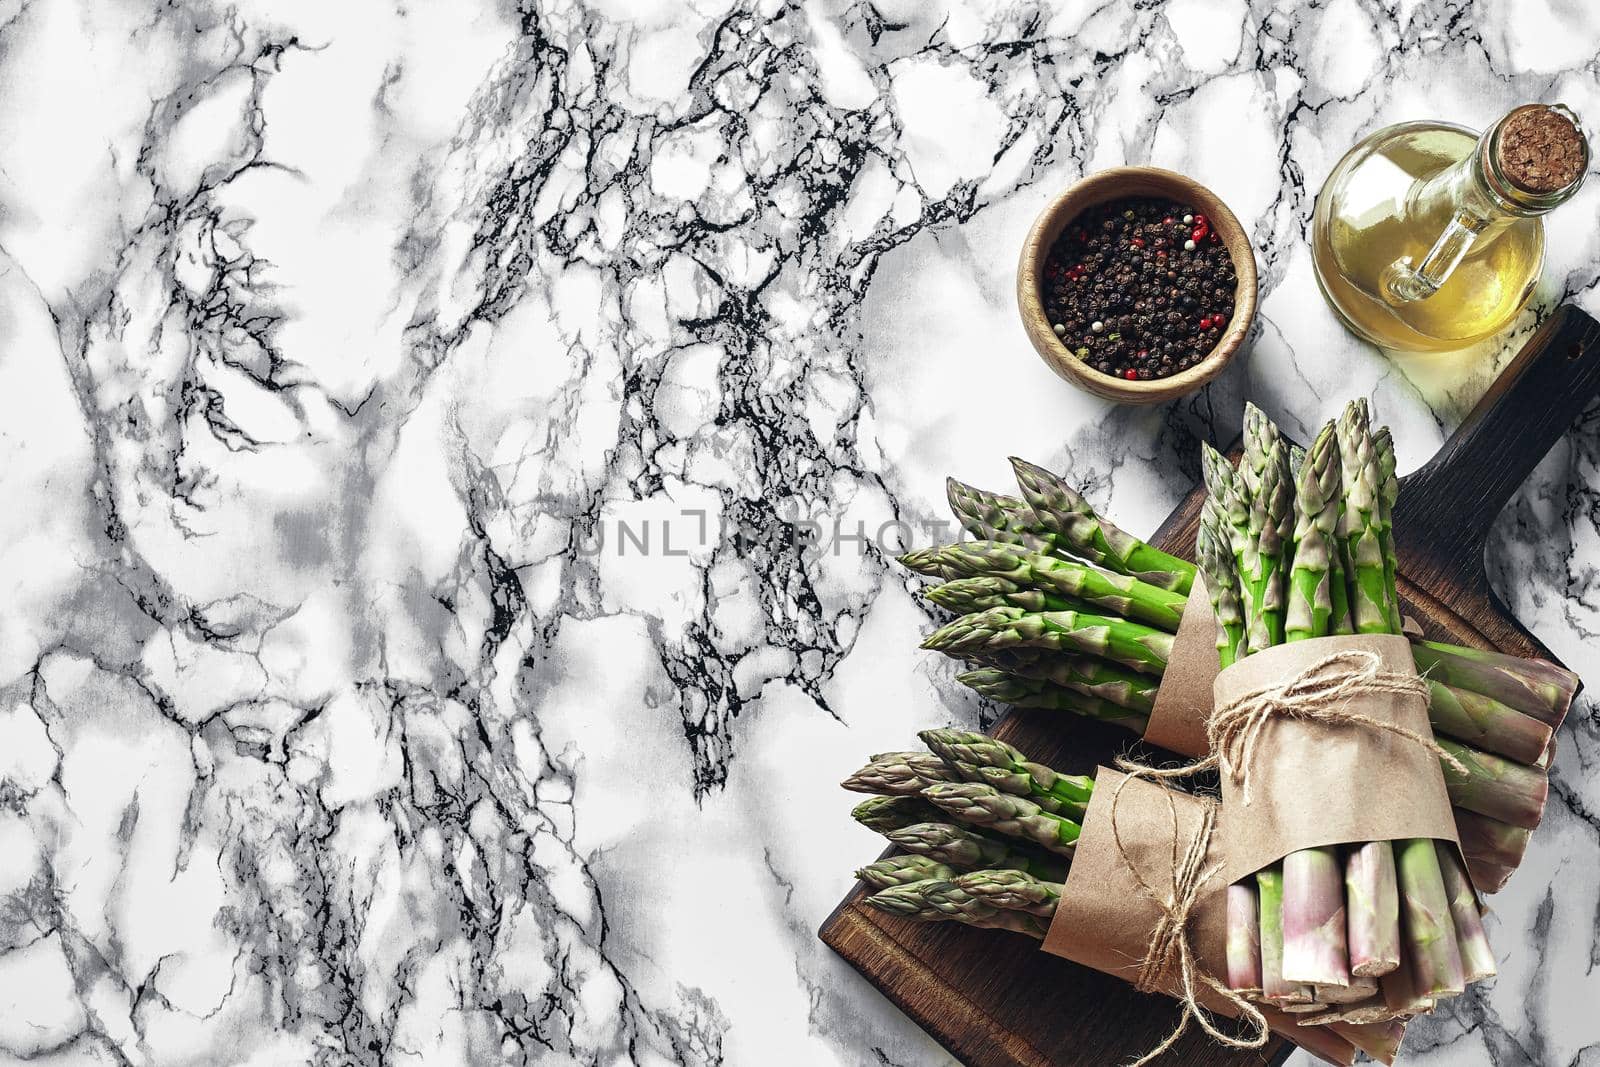 Bunch of an edible, fresh sprouts of asparagus on a wooden board, marble background. Green vegetables with olive oil and seasonings, top view. Healthy food. Spring harvest, agricultural farming concept.